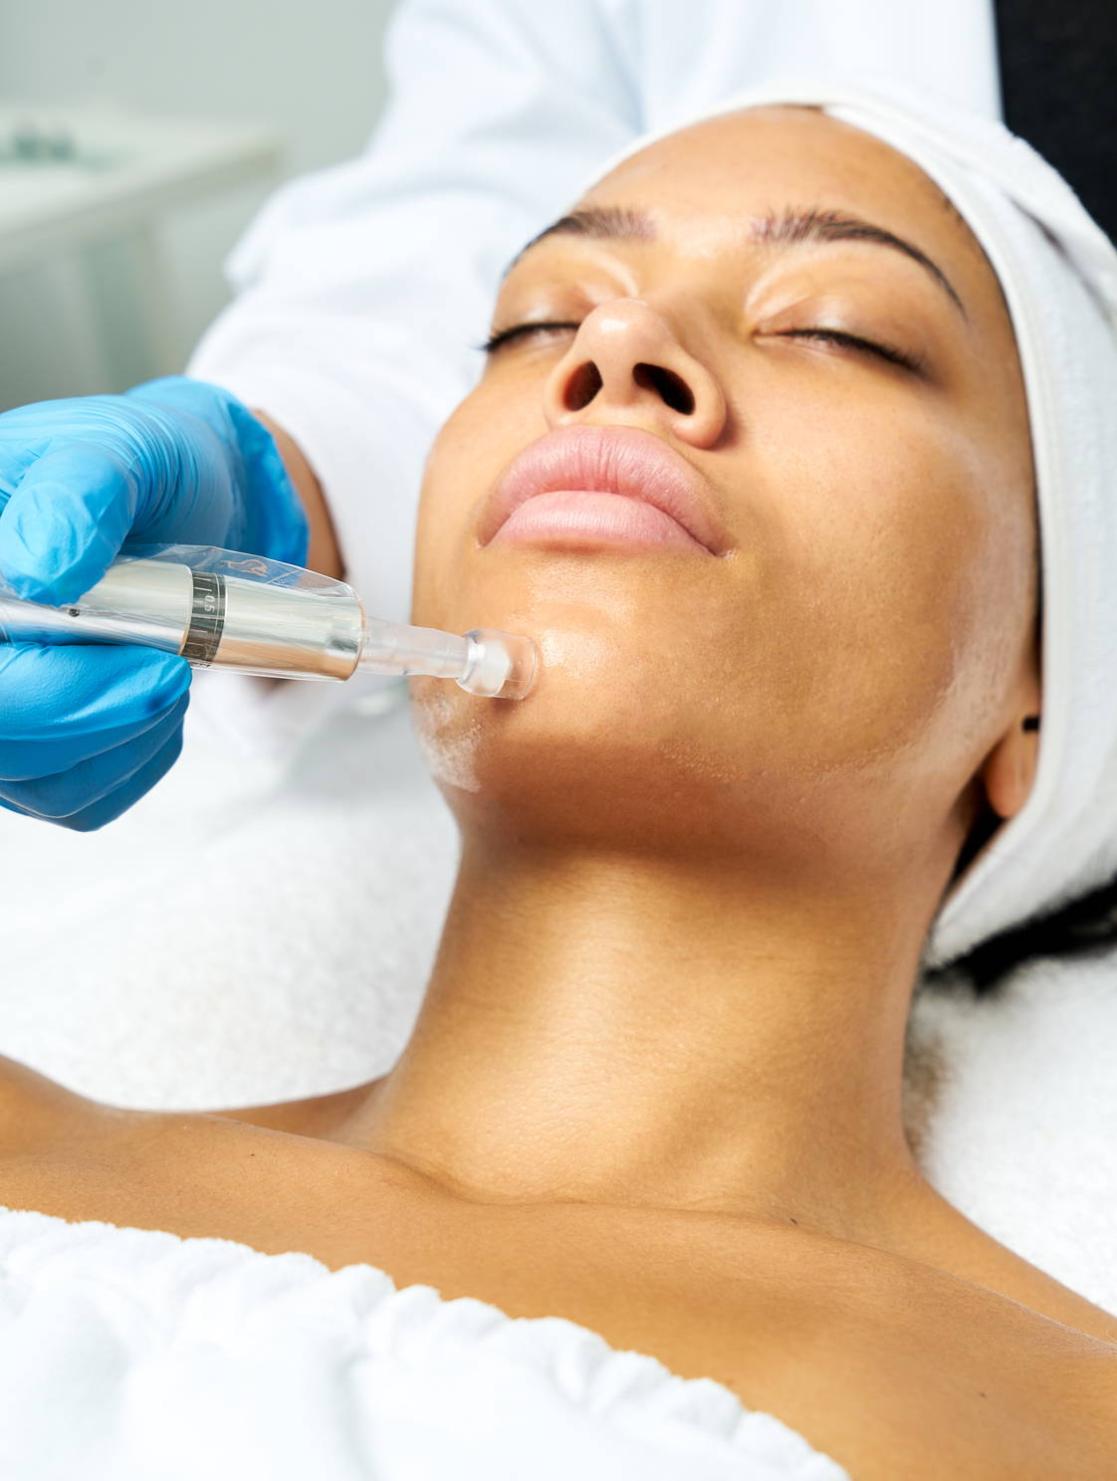 How Long Does It Take to See Results from Microneedling?